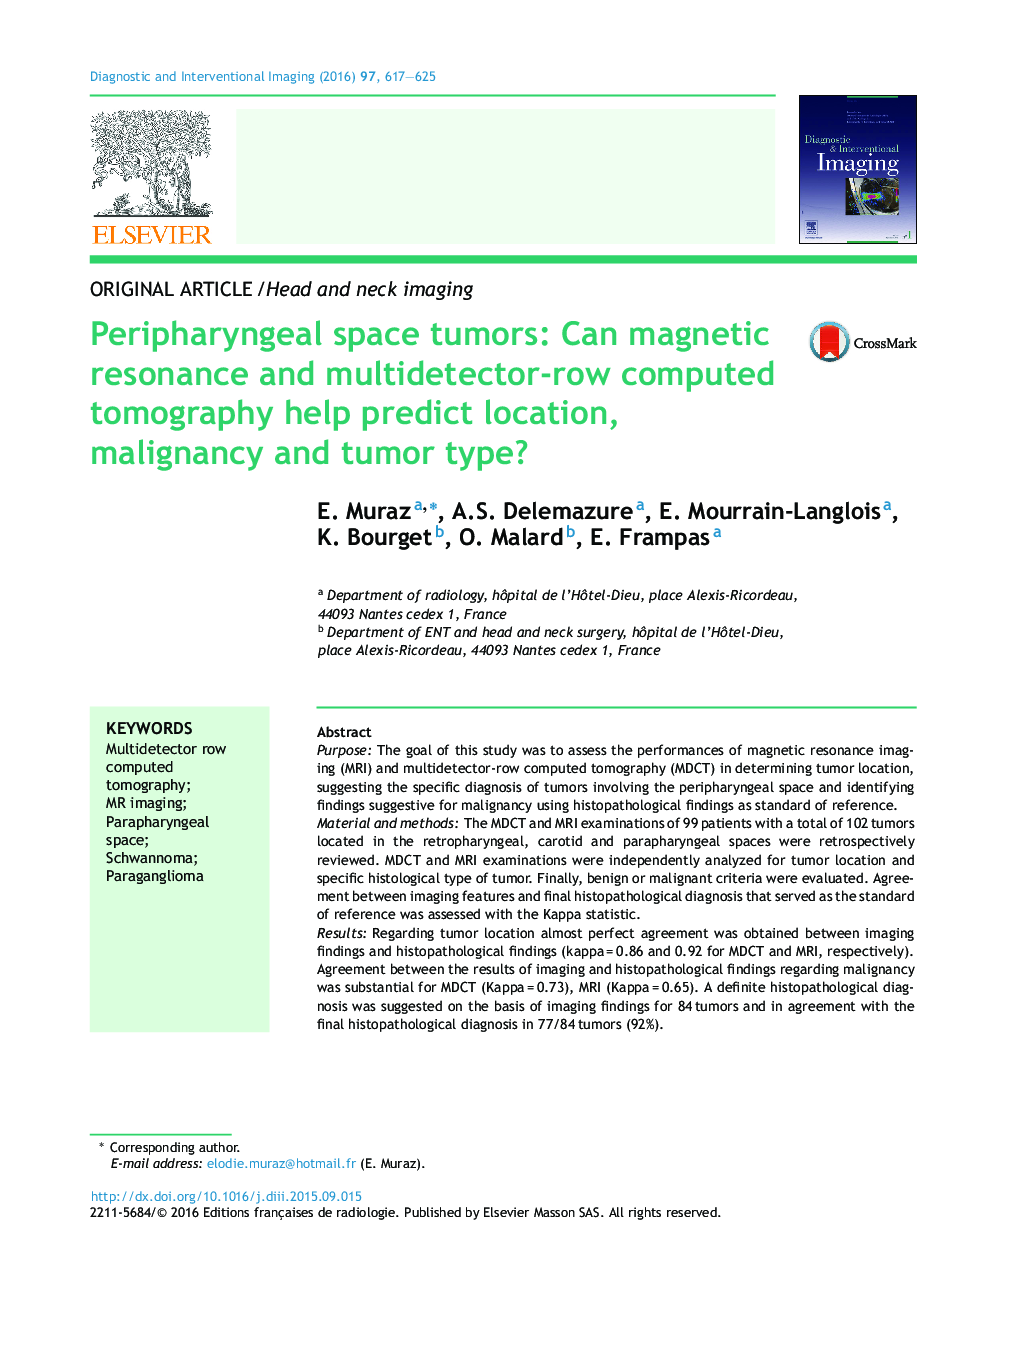 Peripharyngeal space tumors: Can magnetic resonance and multidetector-row computed tomography help predict location, malignancy and tumor type?